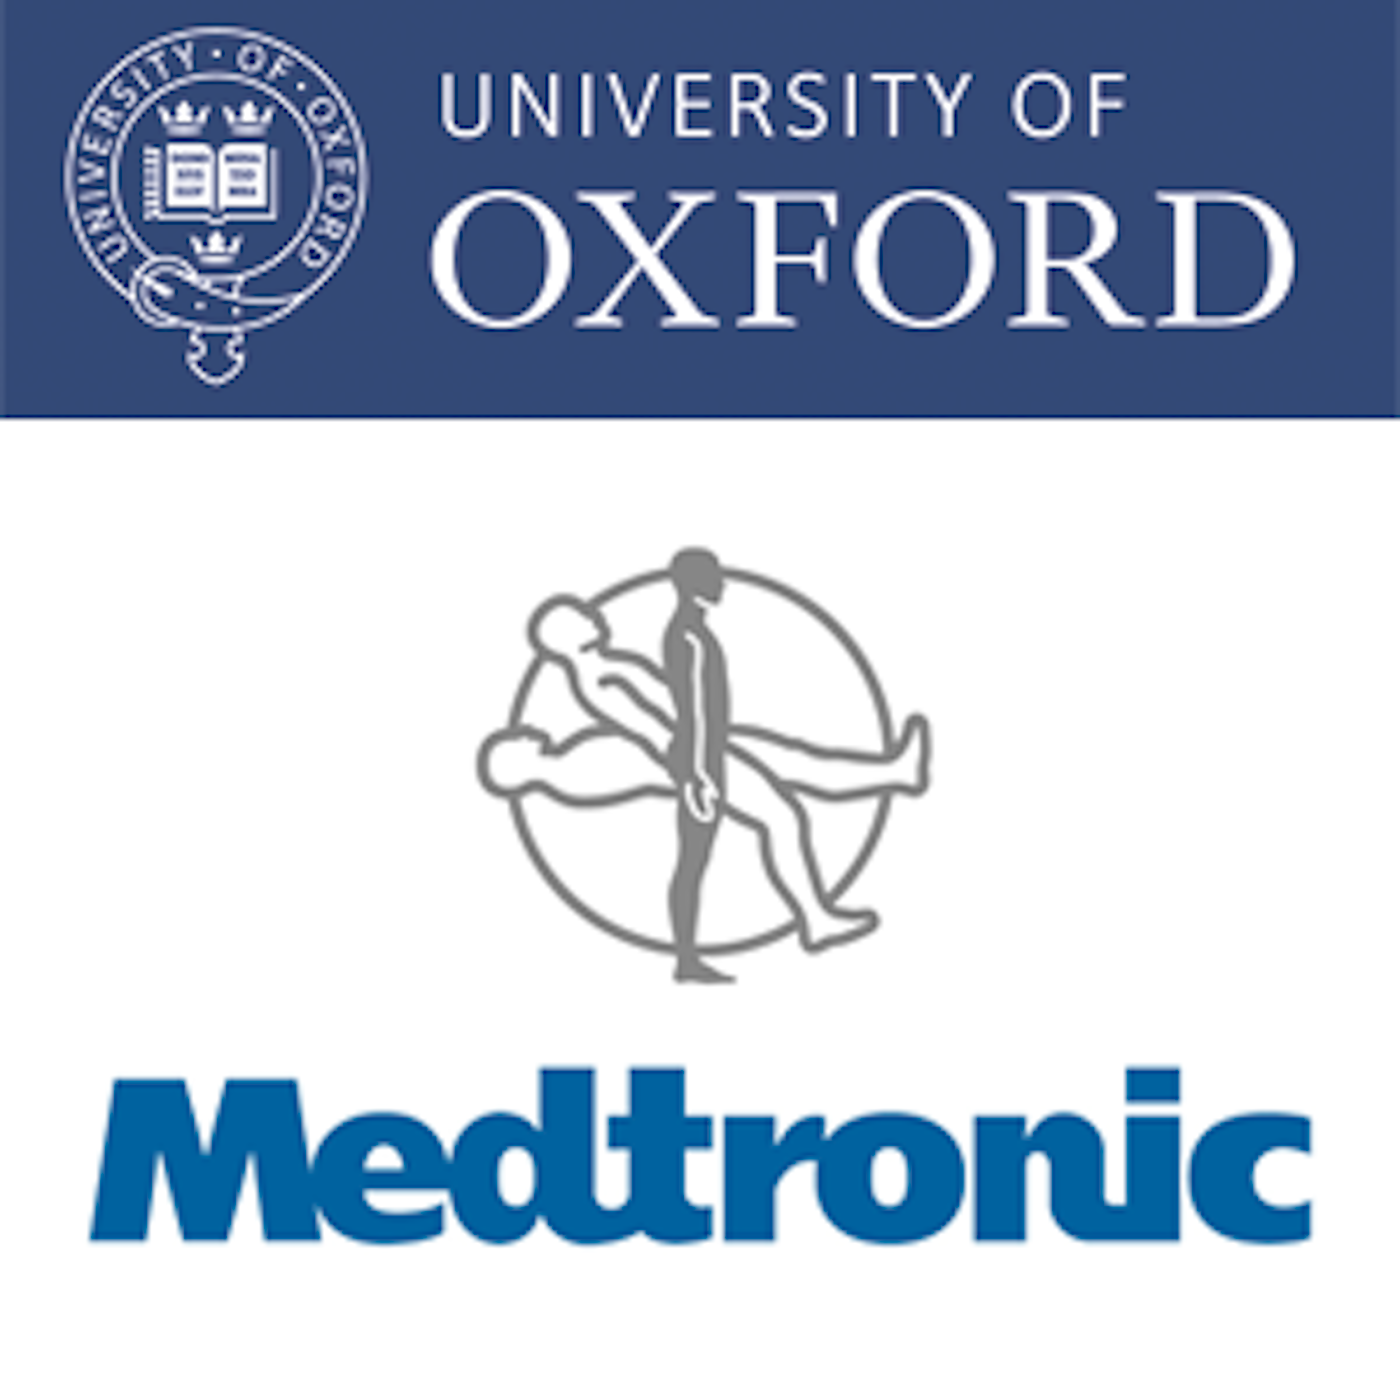 The Medtronic Lectures in Biomedical Engineering